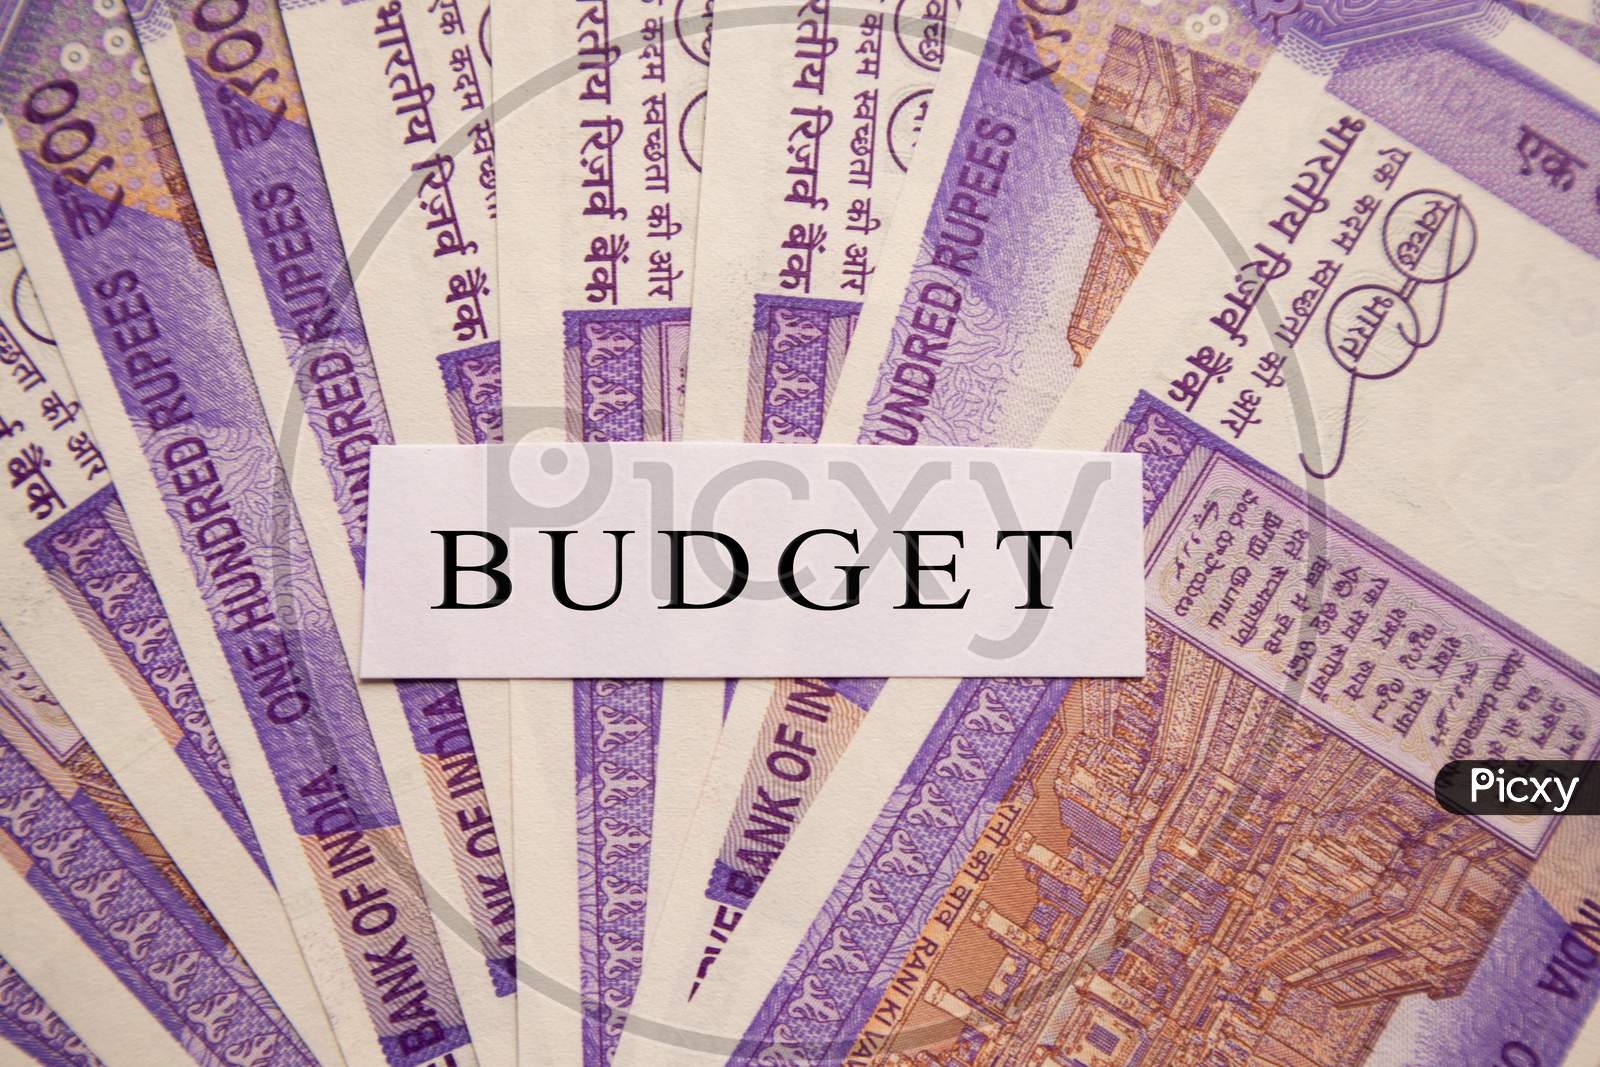 Budget Printed On New Indian Currency Notes